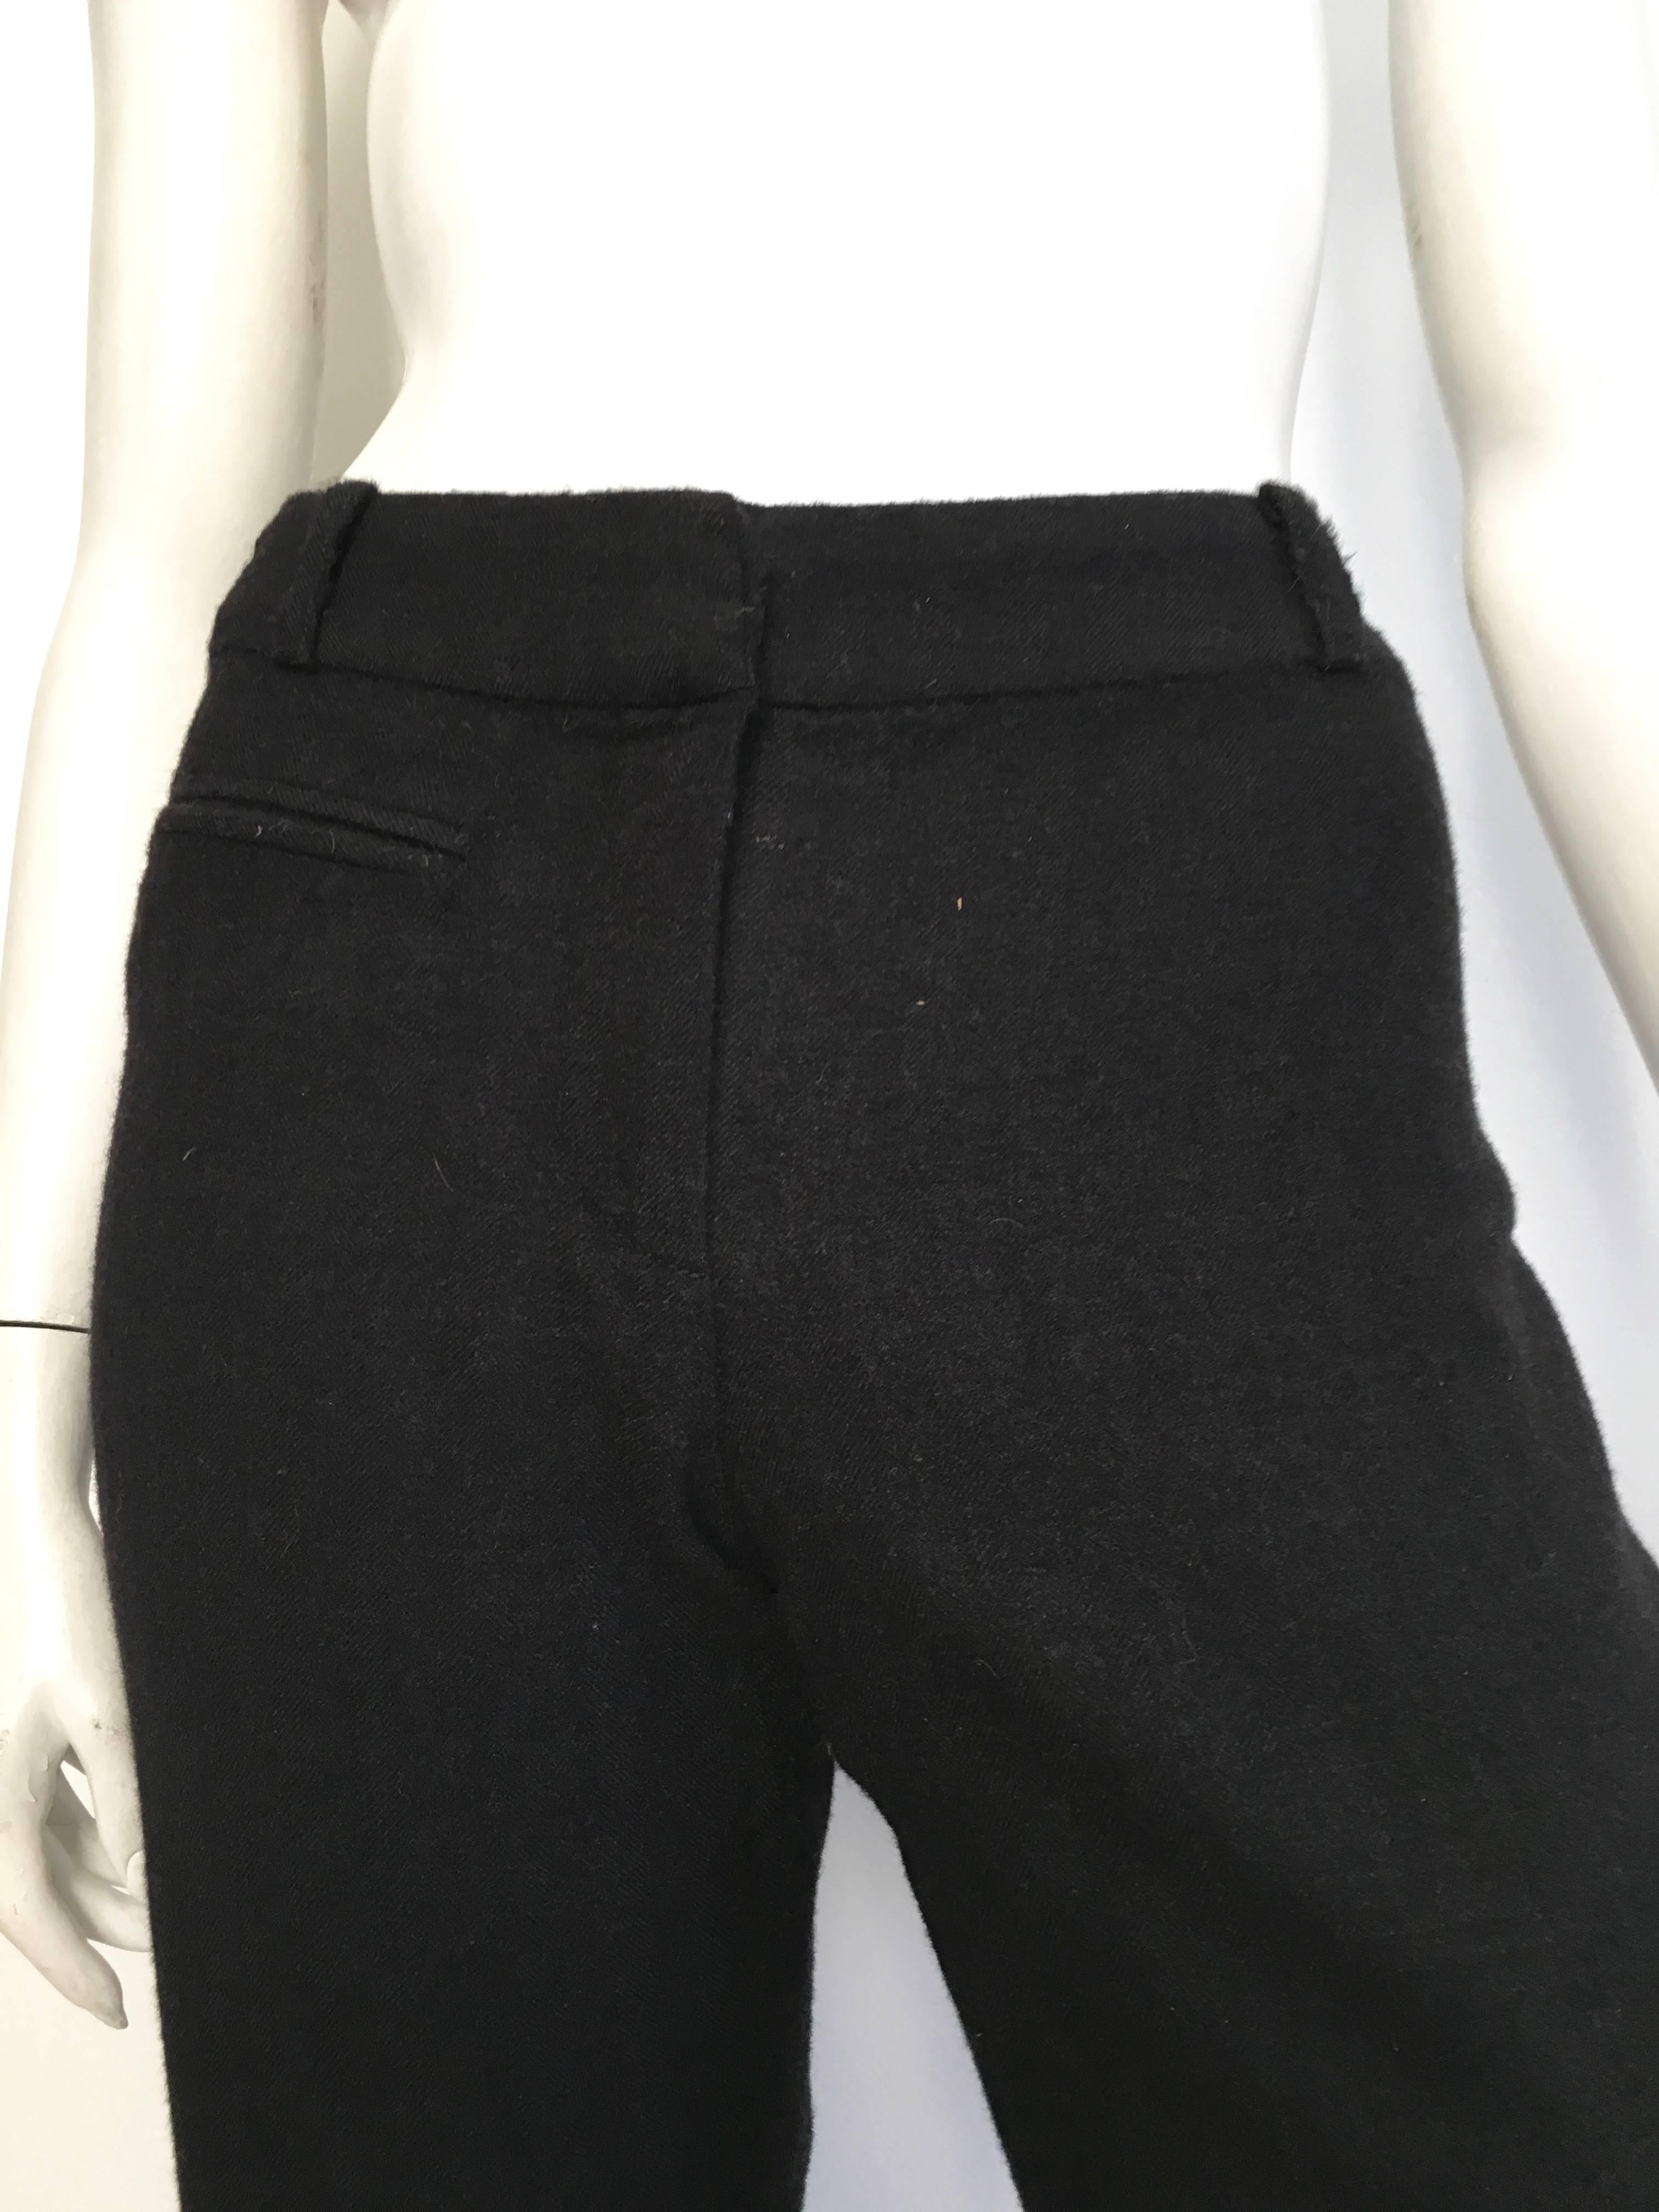 Christian Dior Boutique black wool pants are a size 4.  These fit Matilda the Mannequin snuggly so if your body type is that of Matilda then it's a green light.  The pockets are faux and these pants are silk lined. Please pay attention to the length